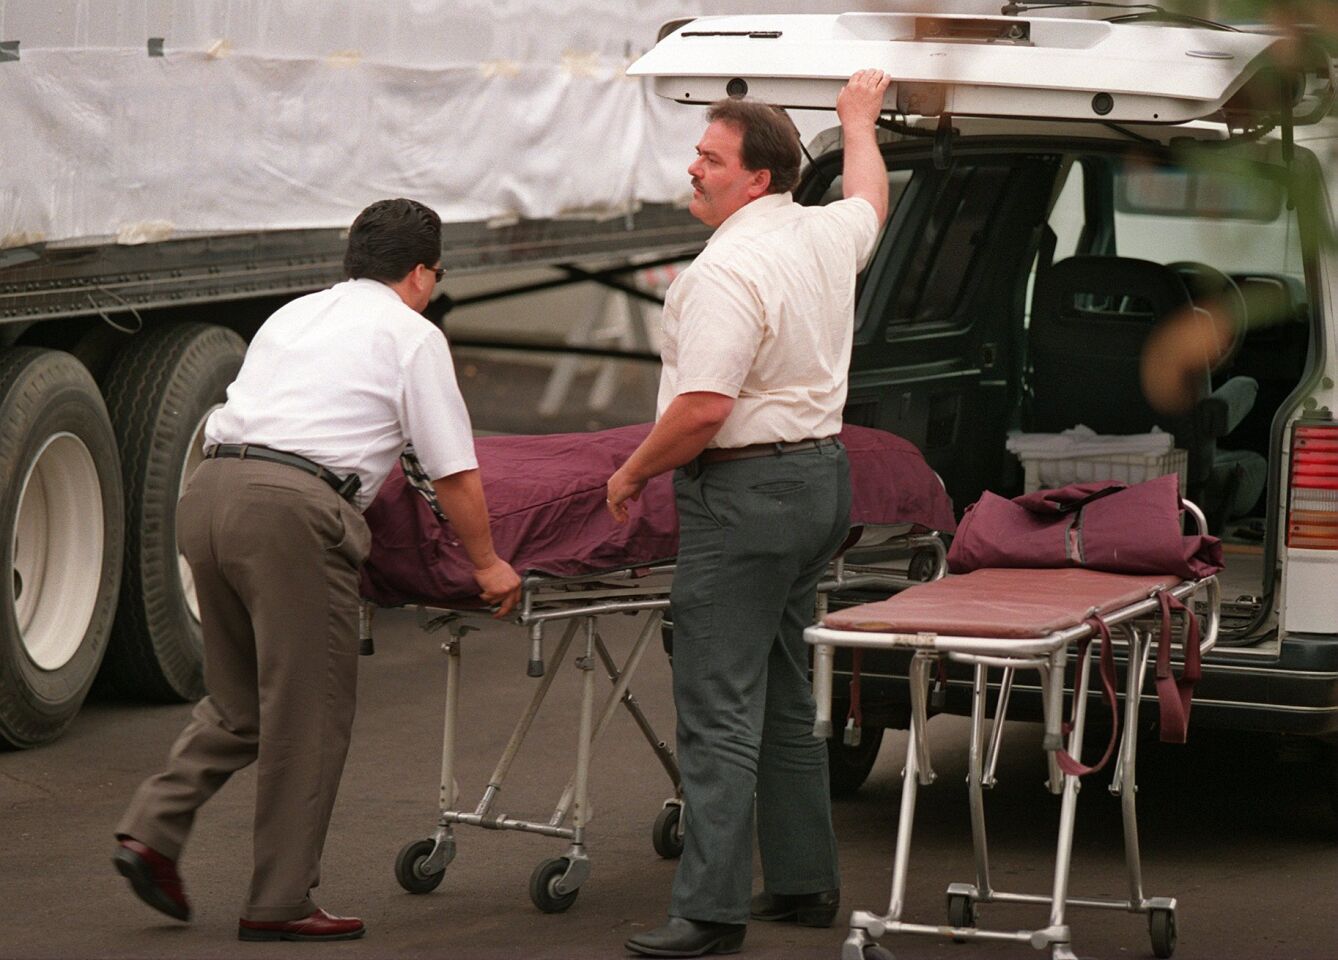 Employees from ADA Mortuary Service loaded into a vehicle one of the bodies from the Heaven's Gate mass suicide in Rancho Santa Fe. The bodies of 39 people were found there on March 26, 1997.